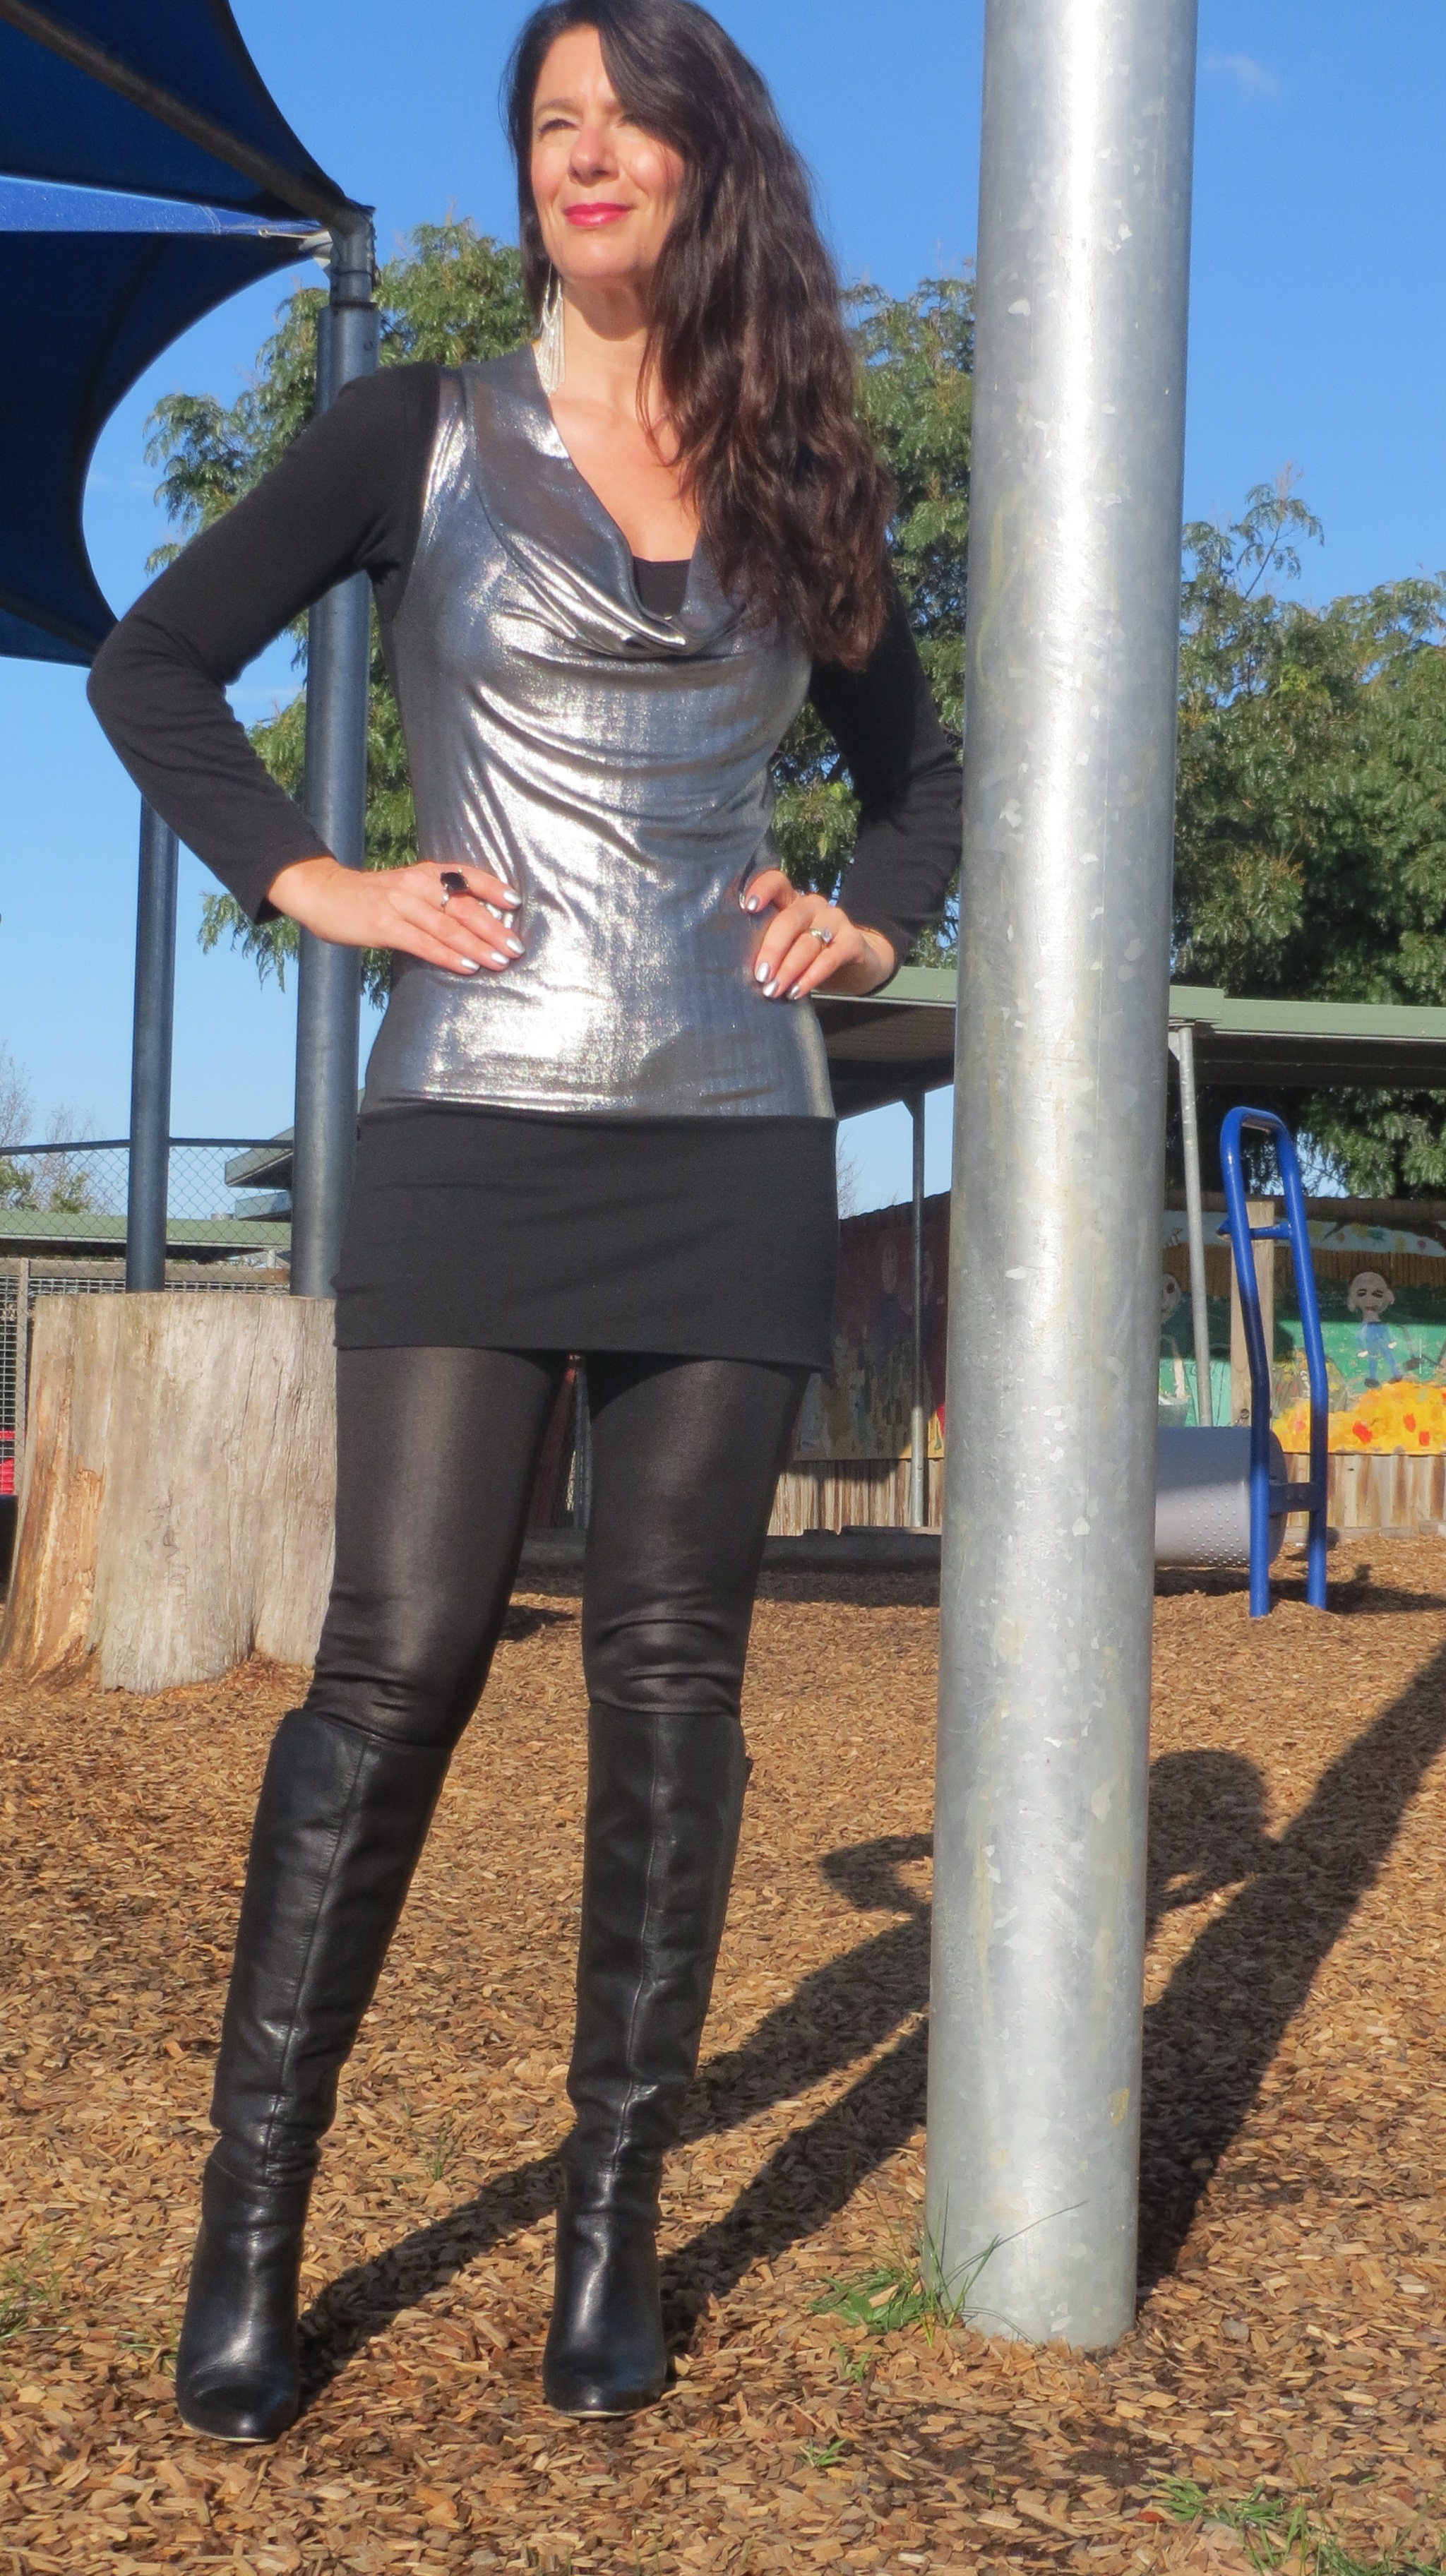 shiny leggings and boots